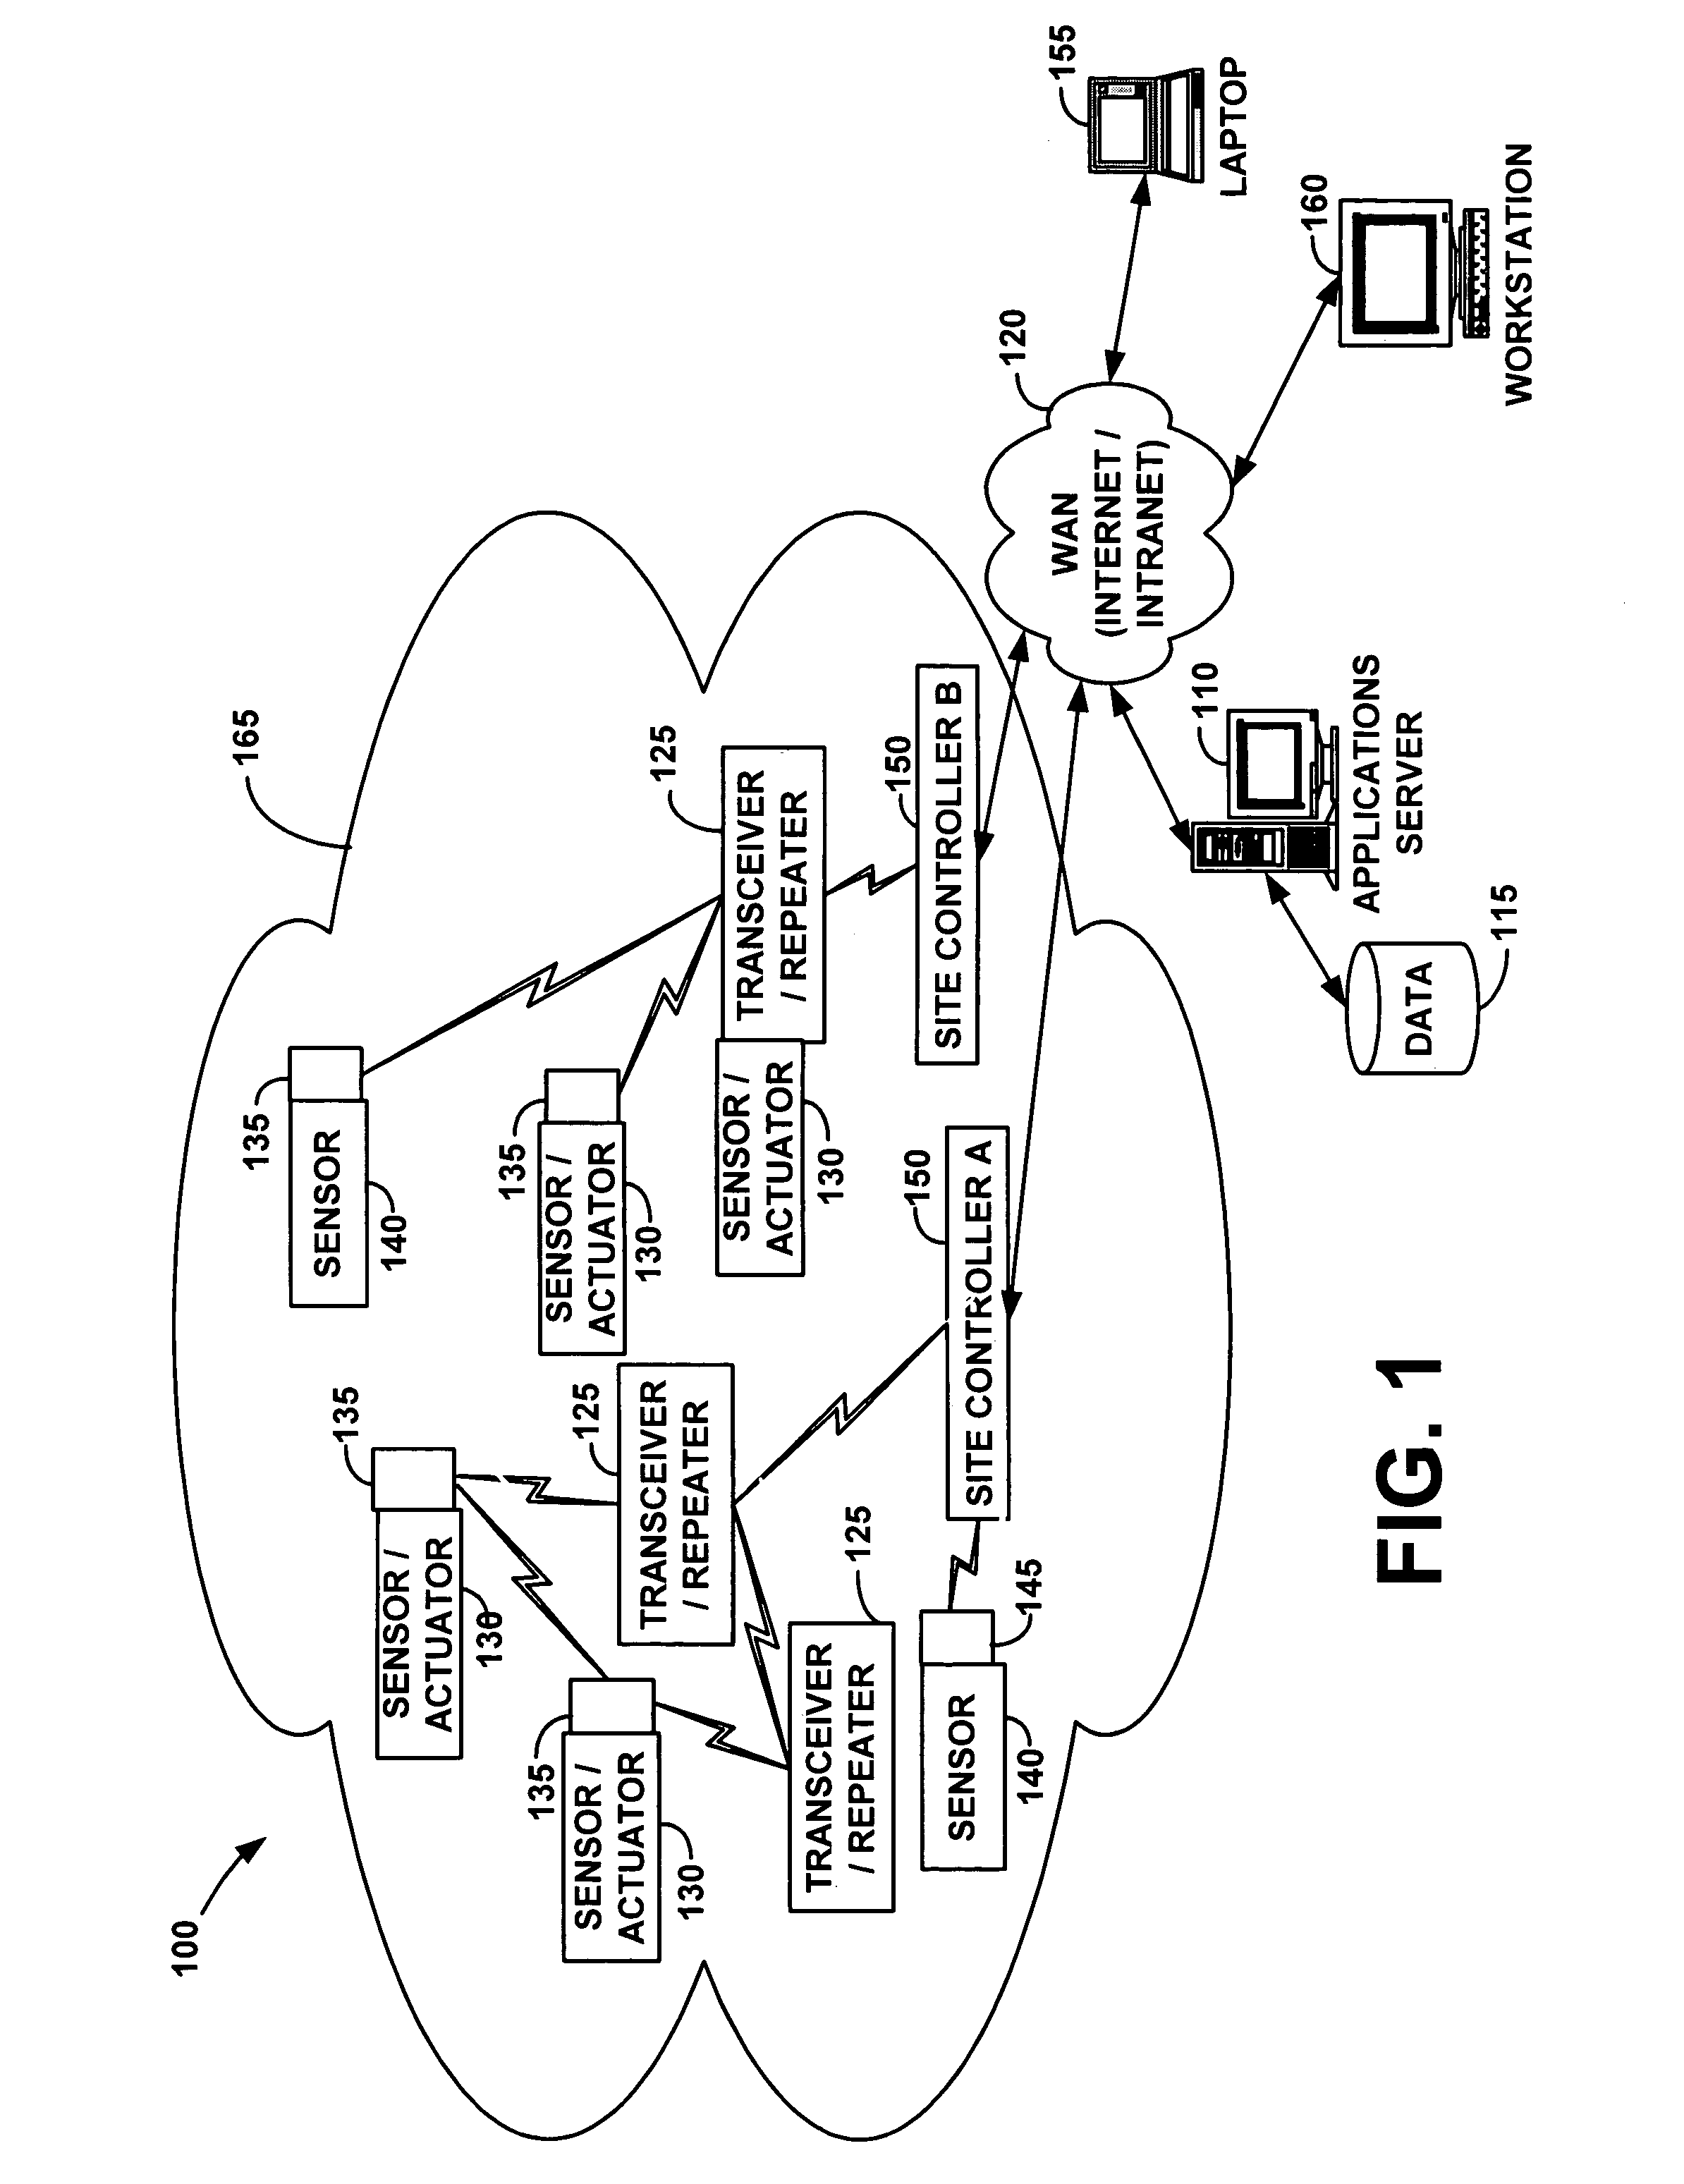 Wireless communication networks for providing remote monitoring of devices